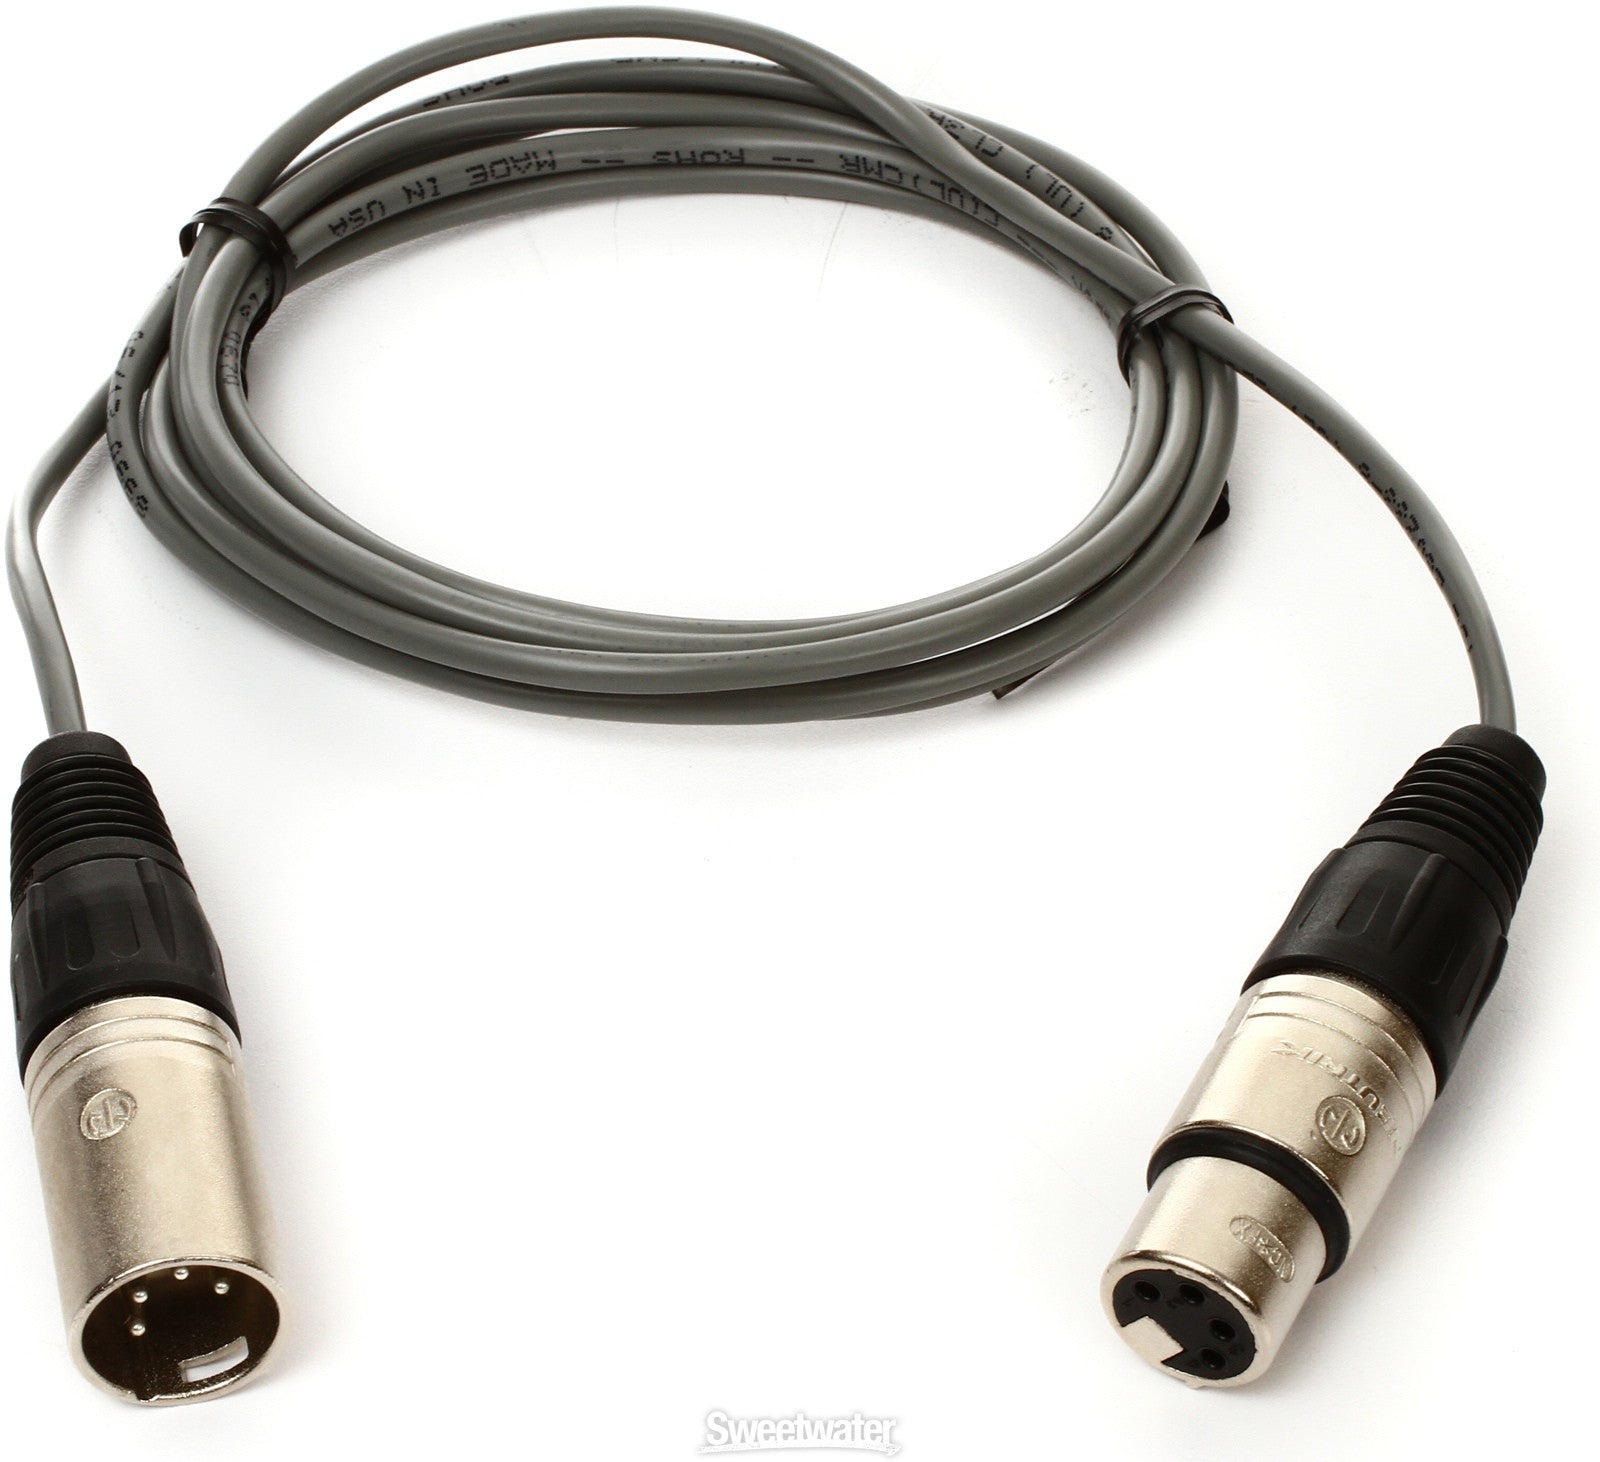 Accessories,Recording Equipment - Chandler Limited - Chandler Limited Stereo Link Cable for Germ Comp MP - Professional Audio Design, Inc